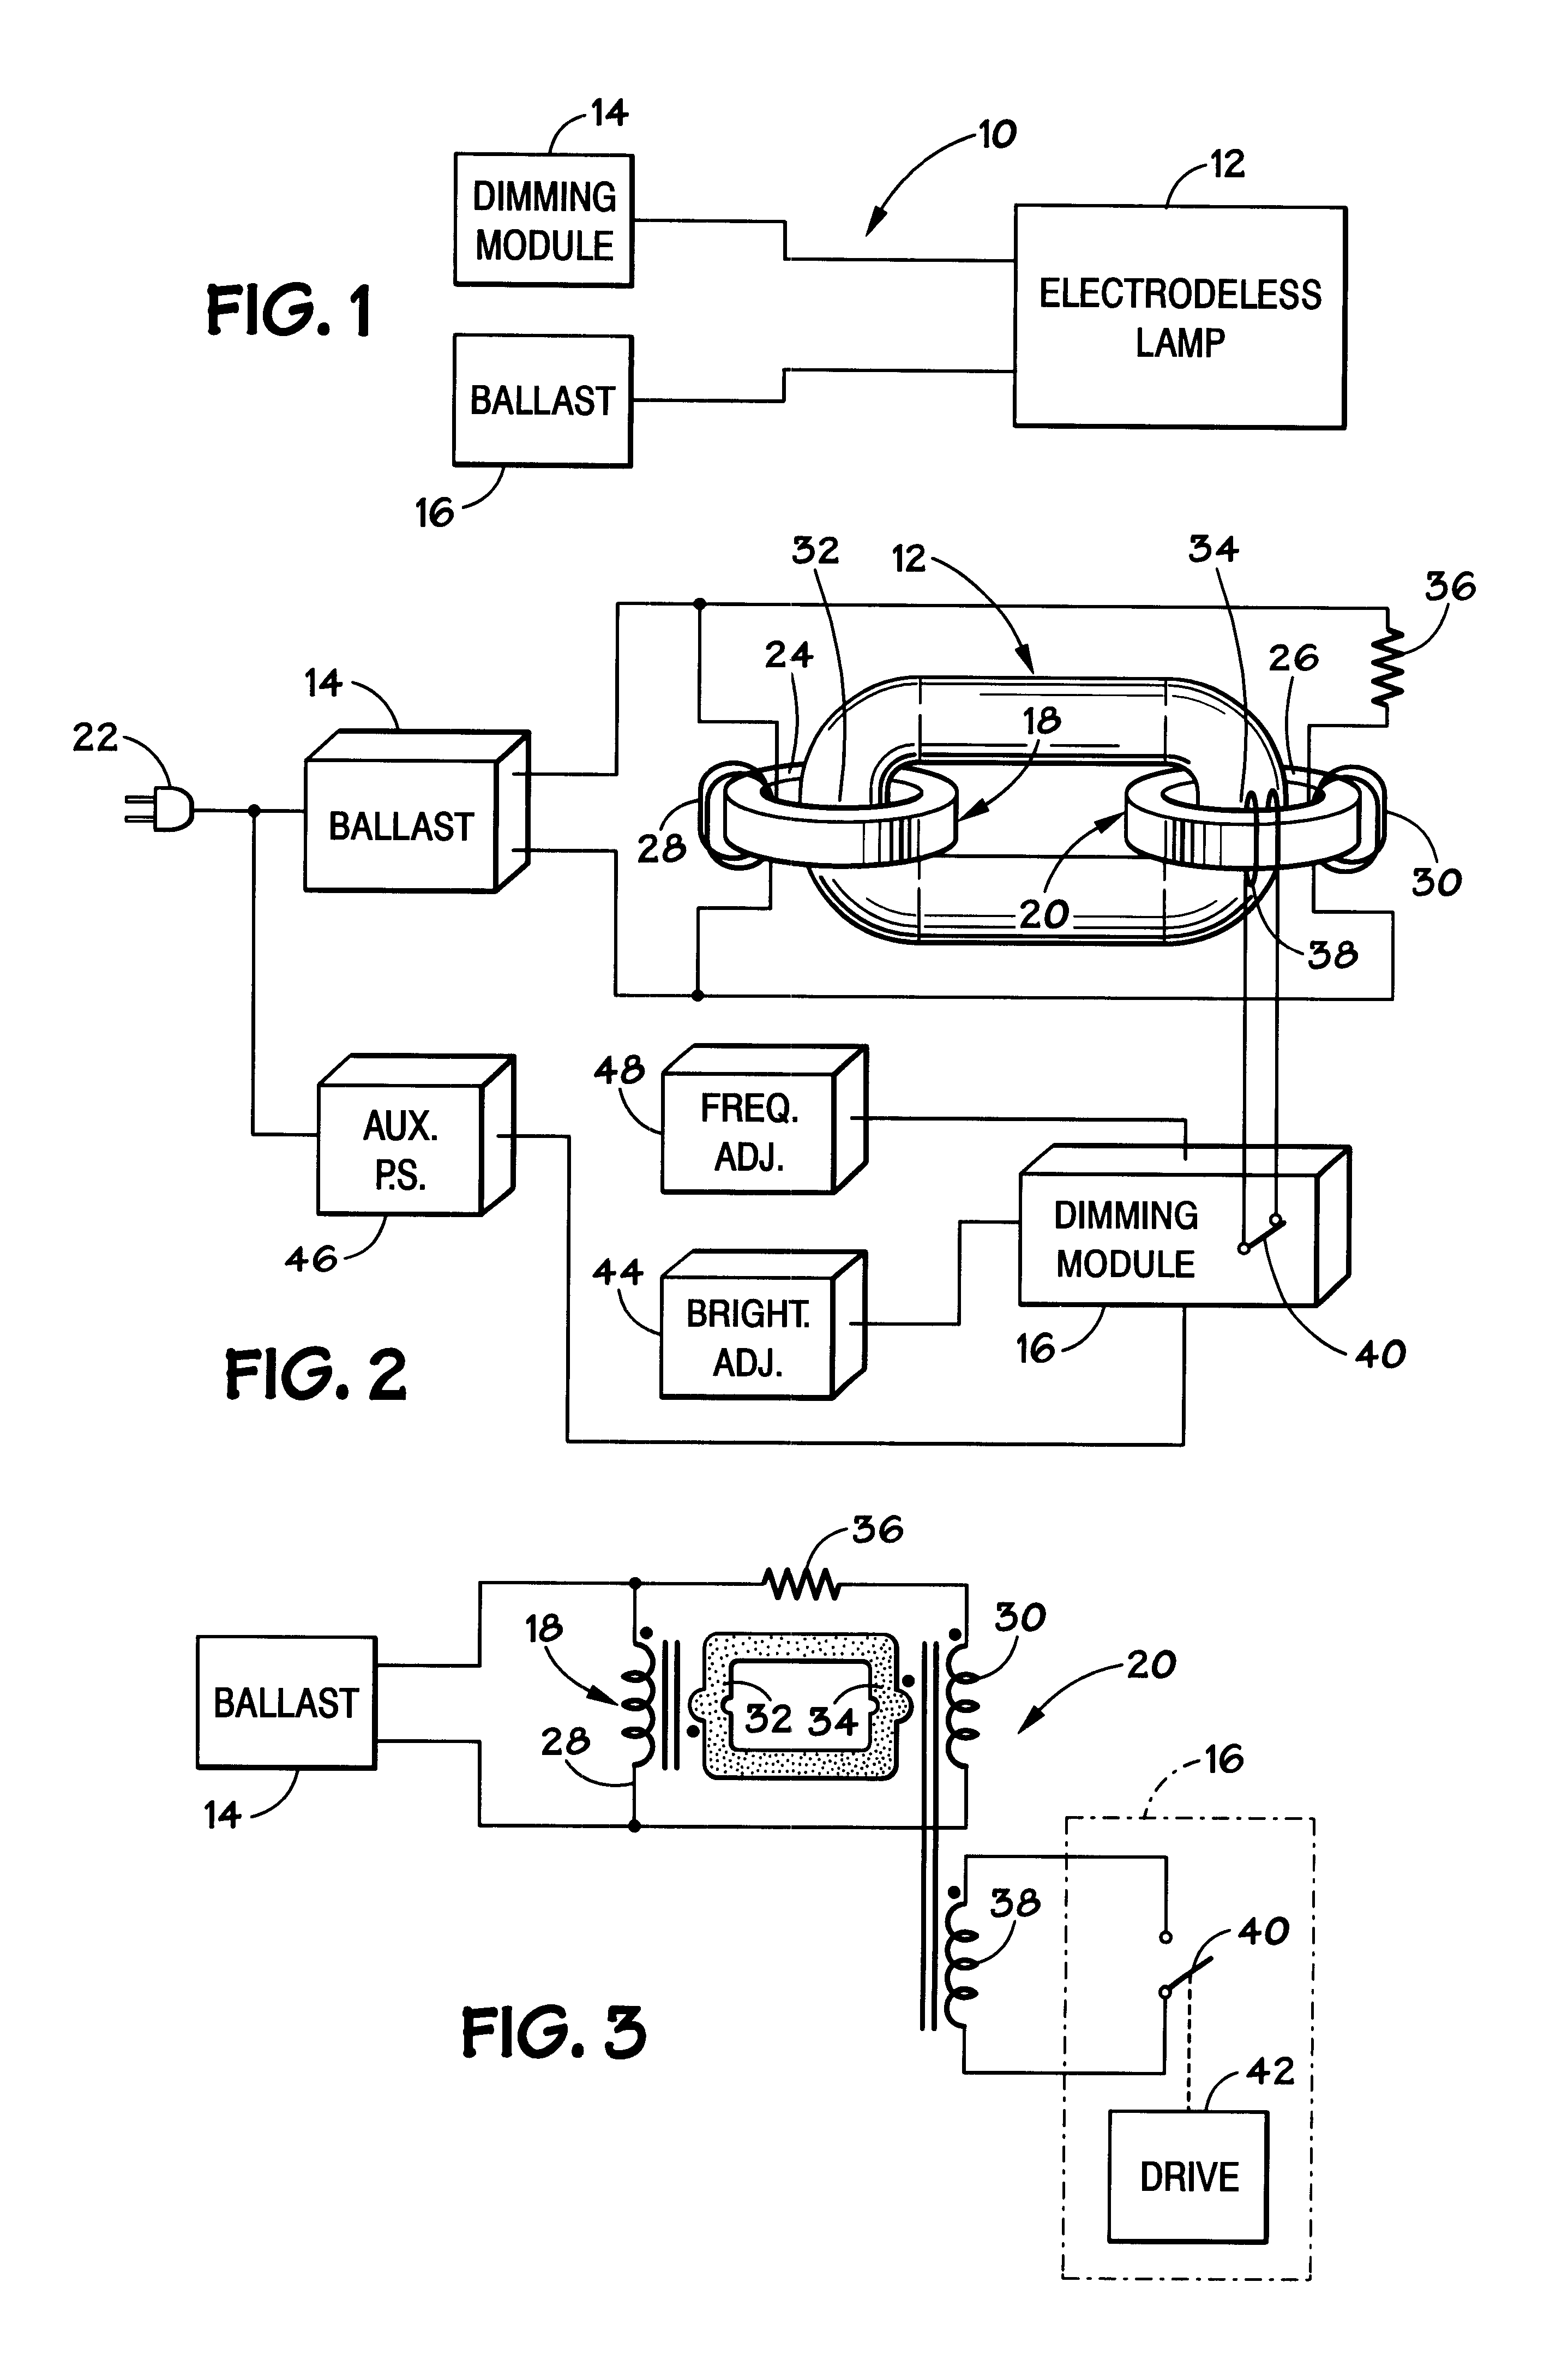 Magnetically shielded electrodeless light source